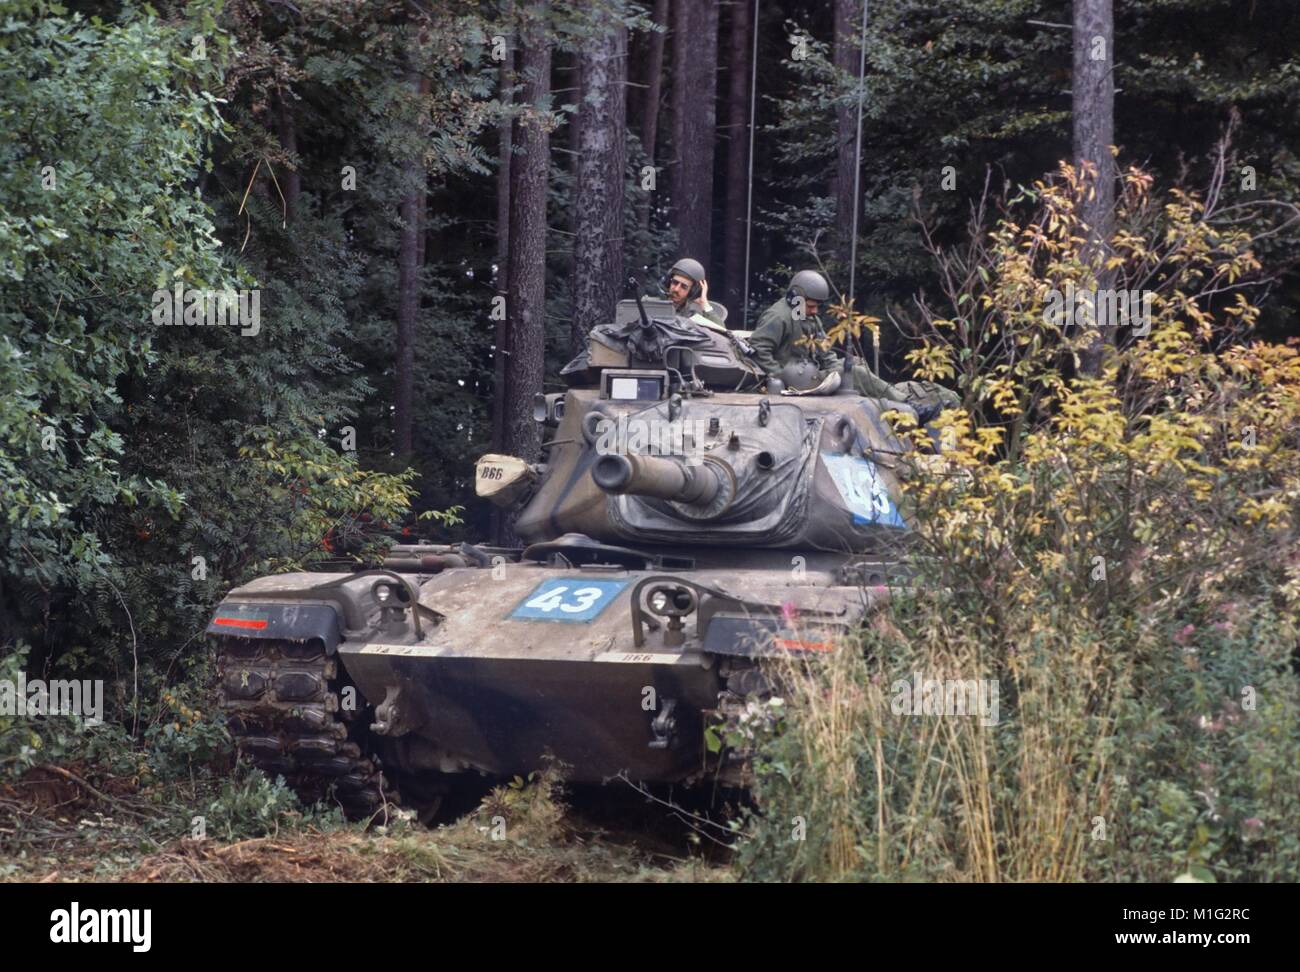 US Army, M 60 tank during NATO exercises in Germany (September 1986) Stock Photo